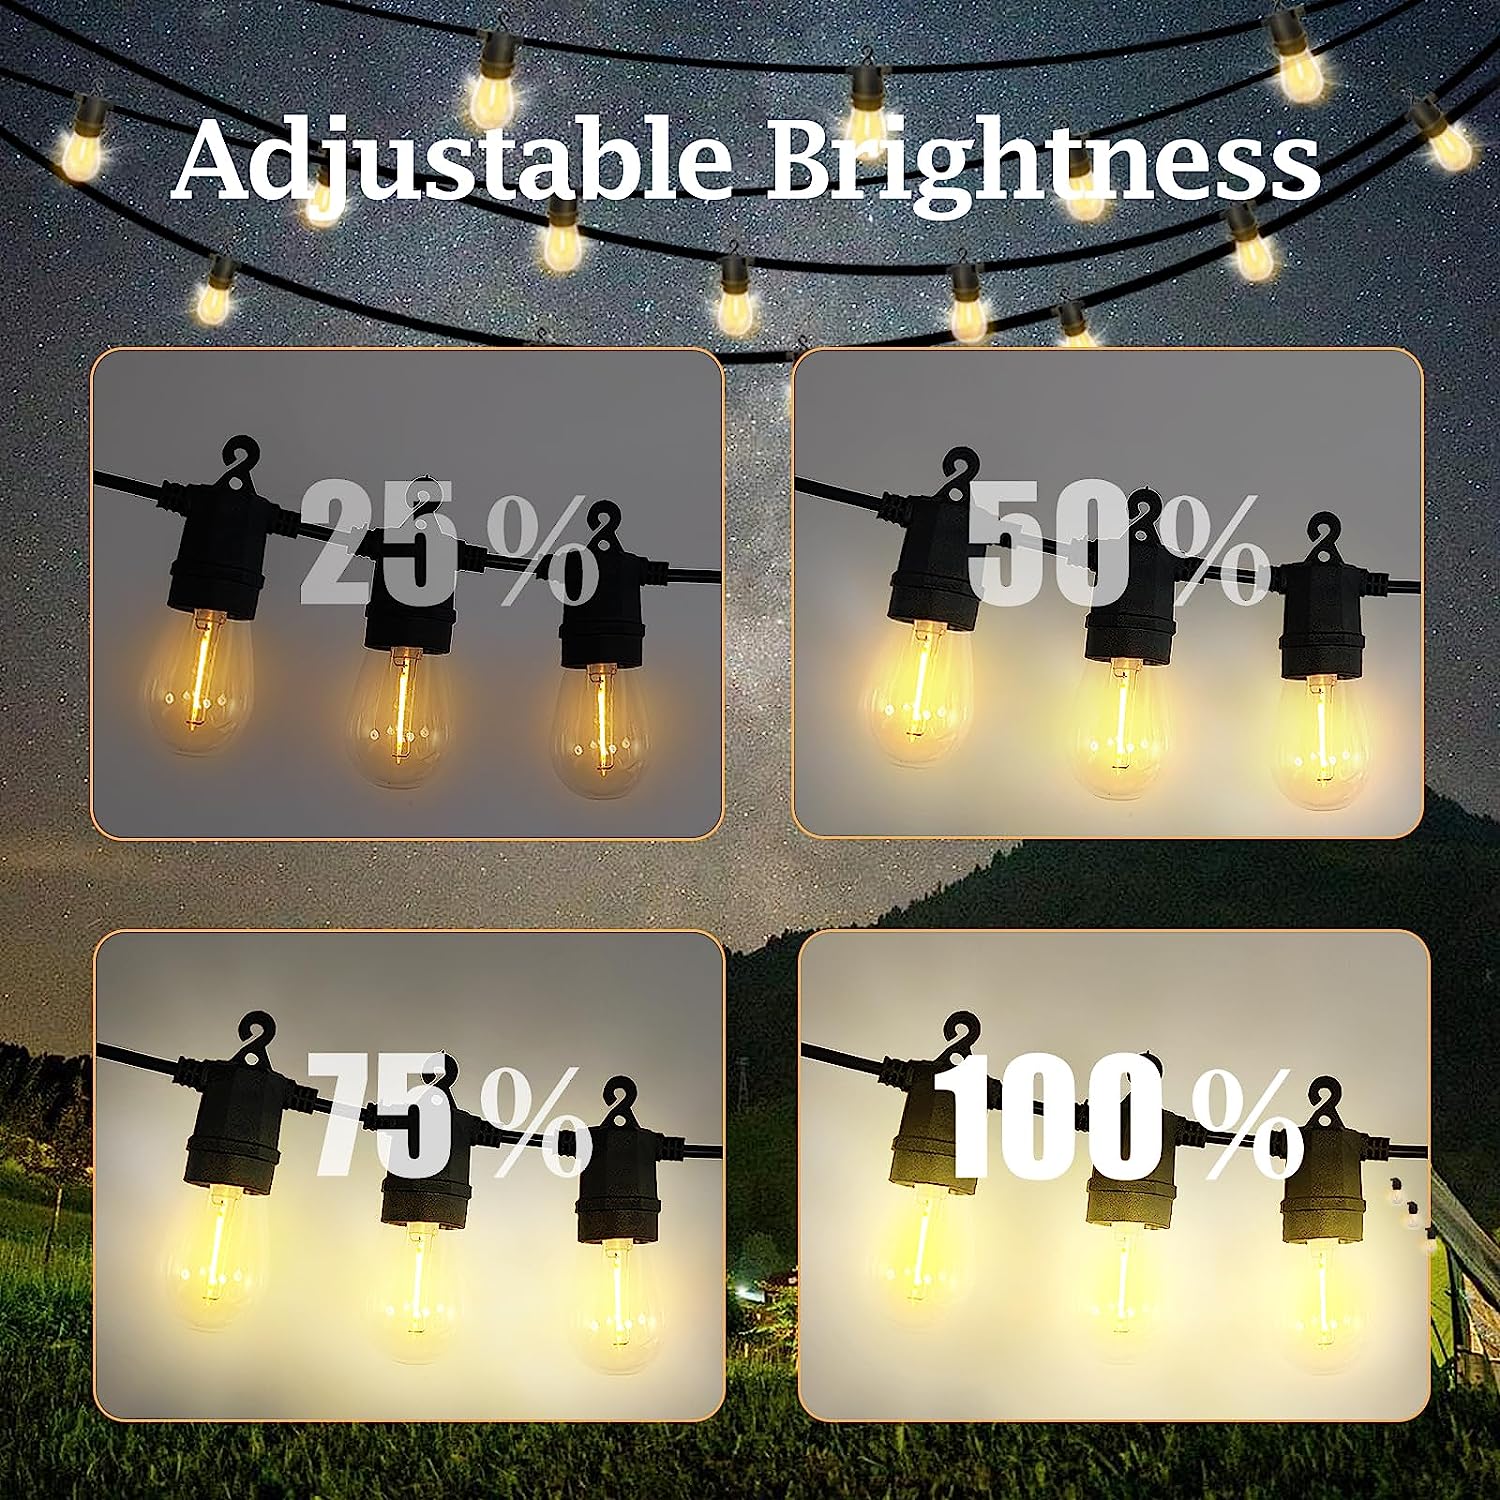 VENETIO CIIC Solar Outdoor String Lights, 48FT LED Patio Lights Solar Powered for Outside IP65 Waterproof&Dimmable, Hanging Solar Lights with 8 Modes 16+2 Shatterproof Bulbs for Party Yard-3000K Warm White ➡ OD-00011